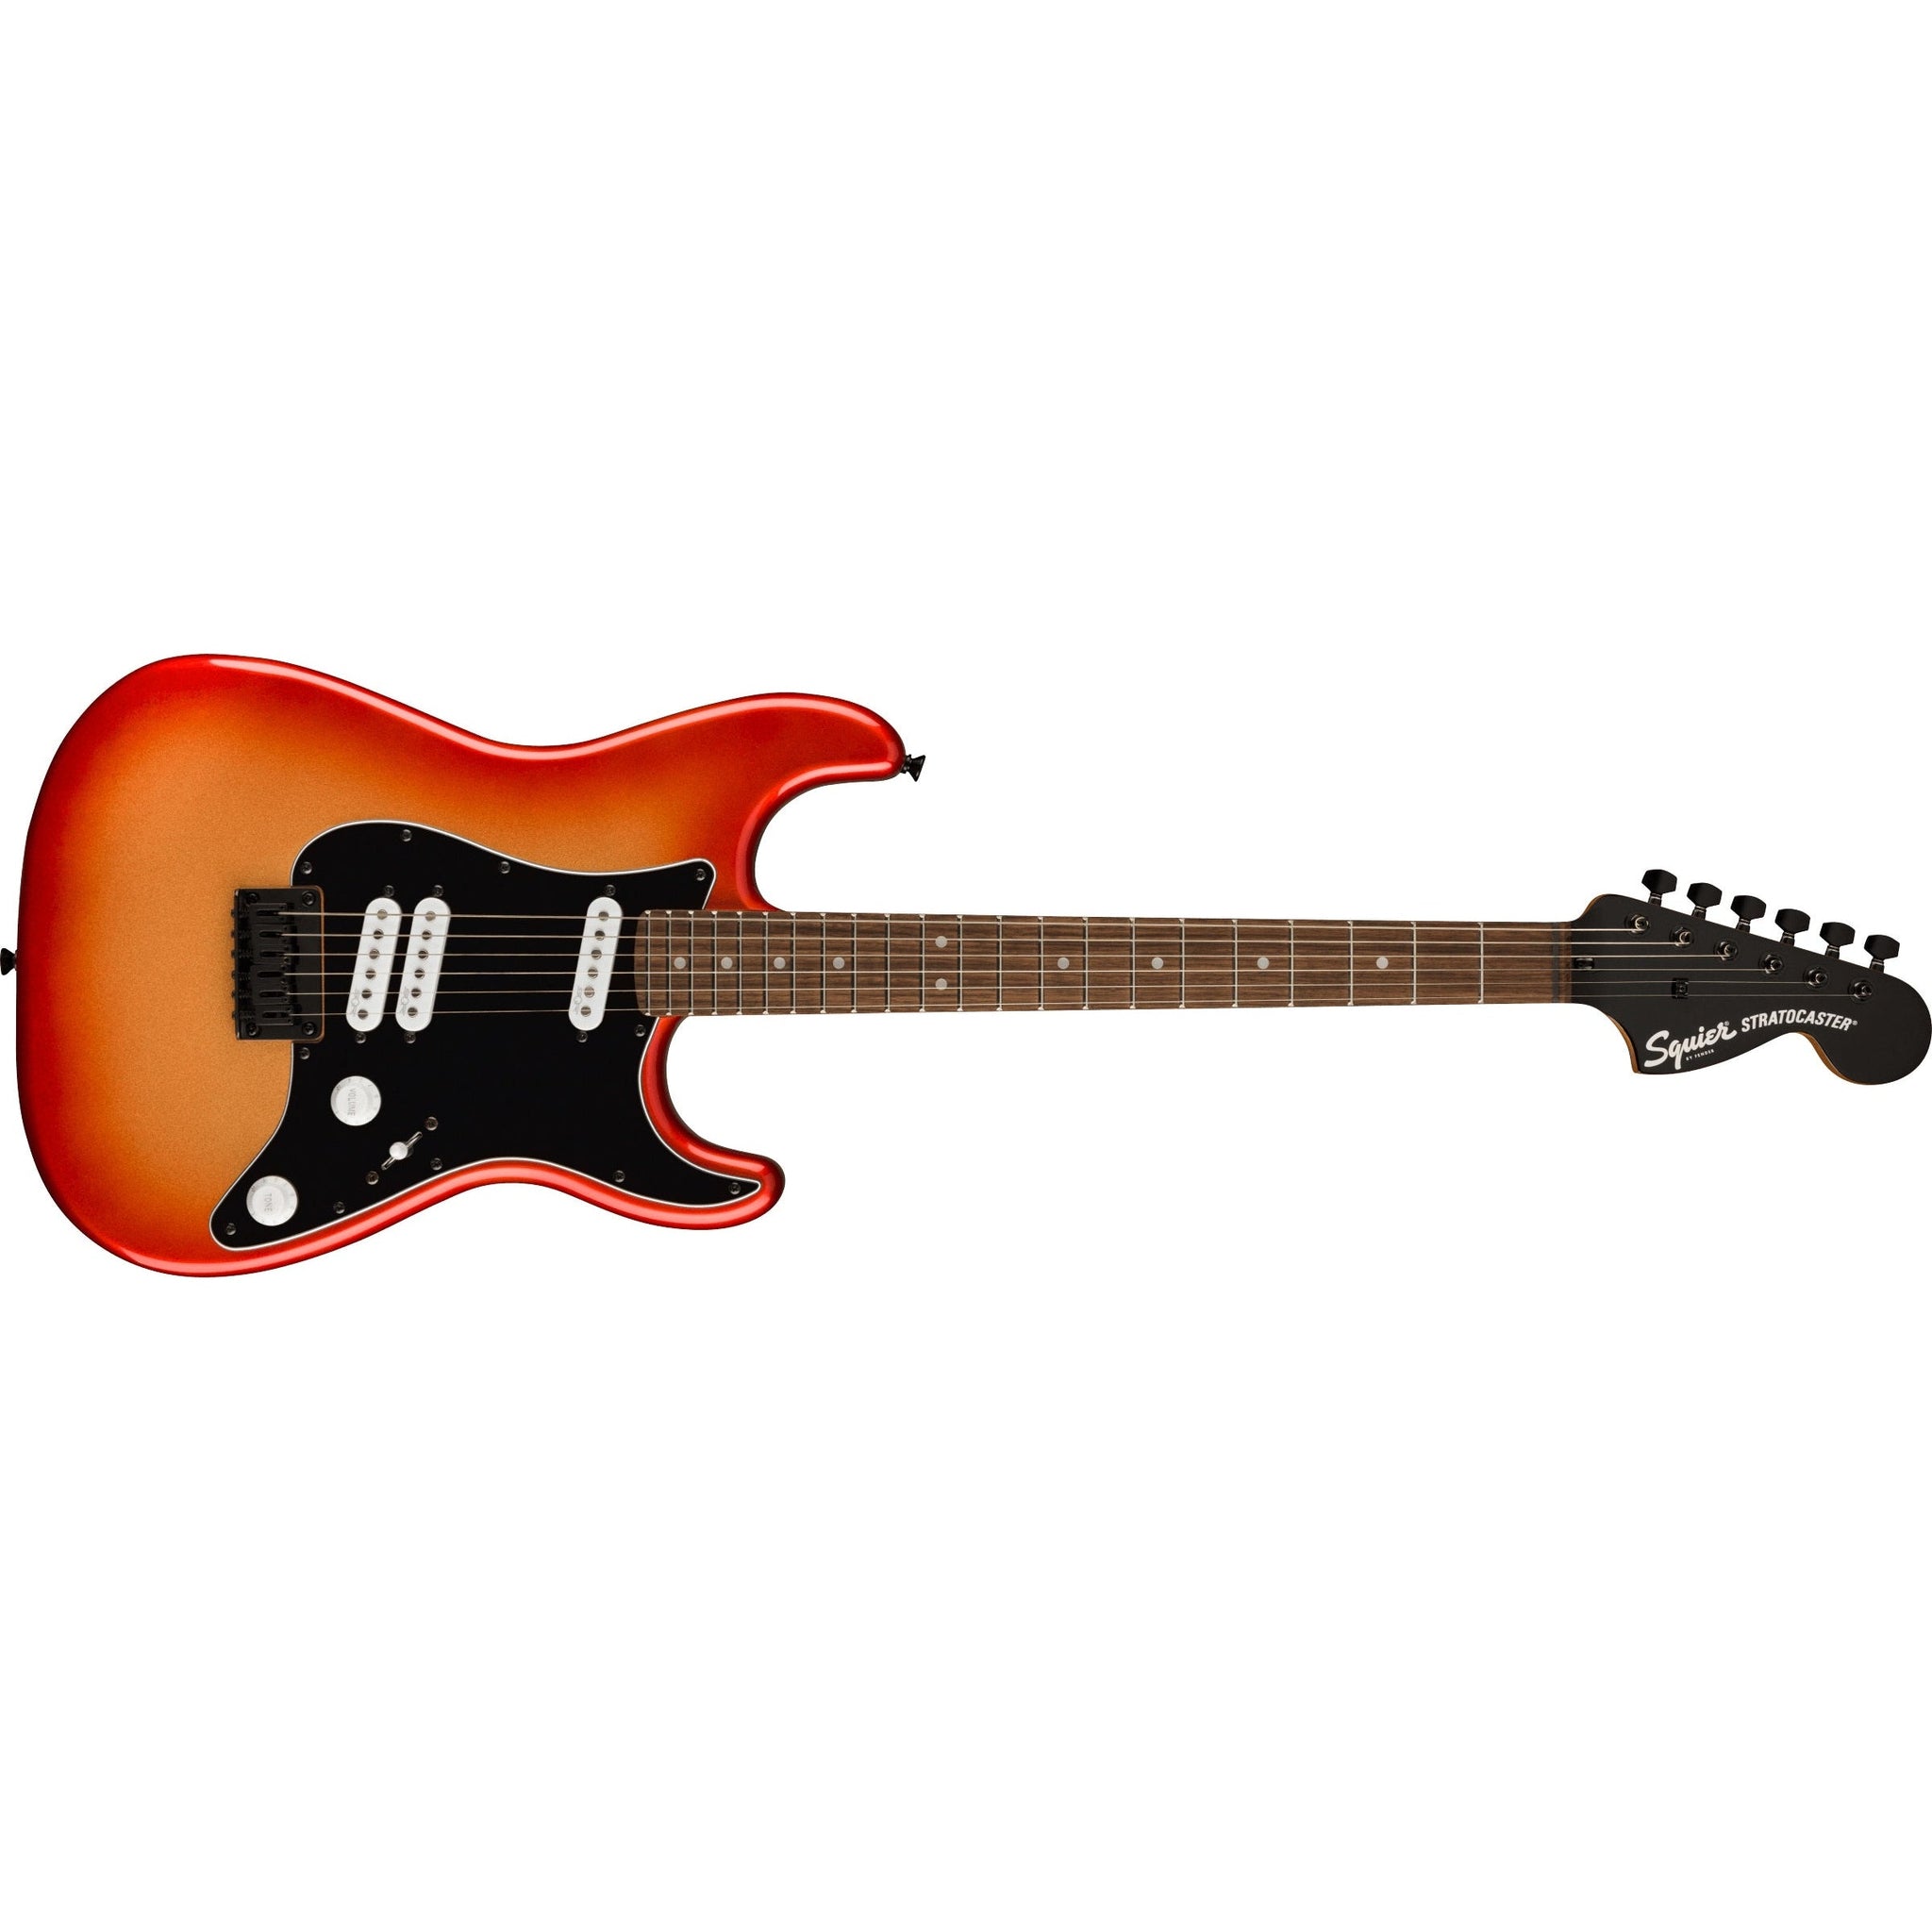 Fender Squier Contemporary Stratocaster Special HT Electric Guitar-Sunset Metallic-Music World Academy